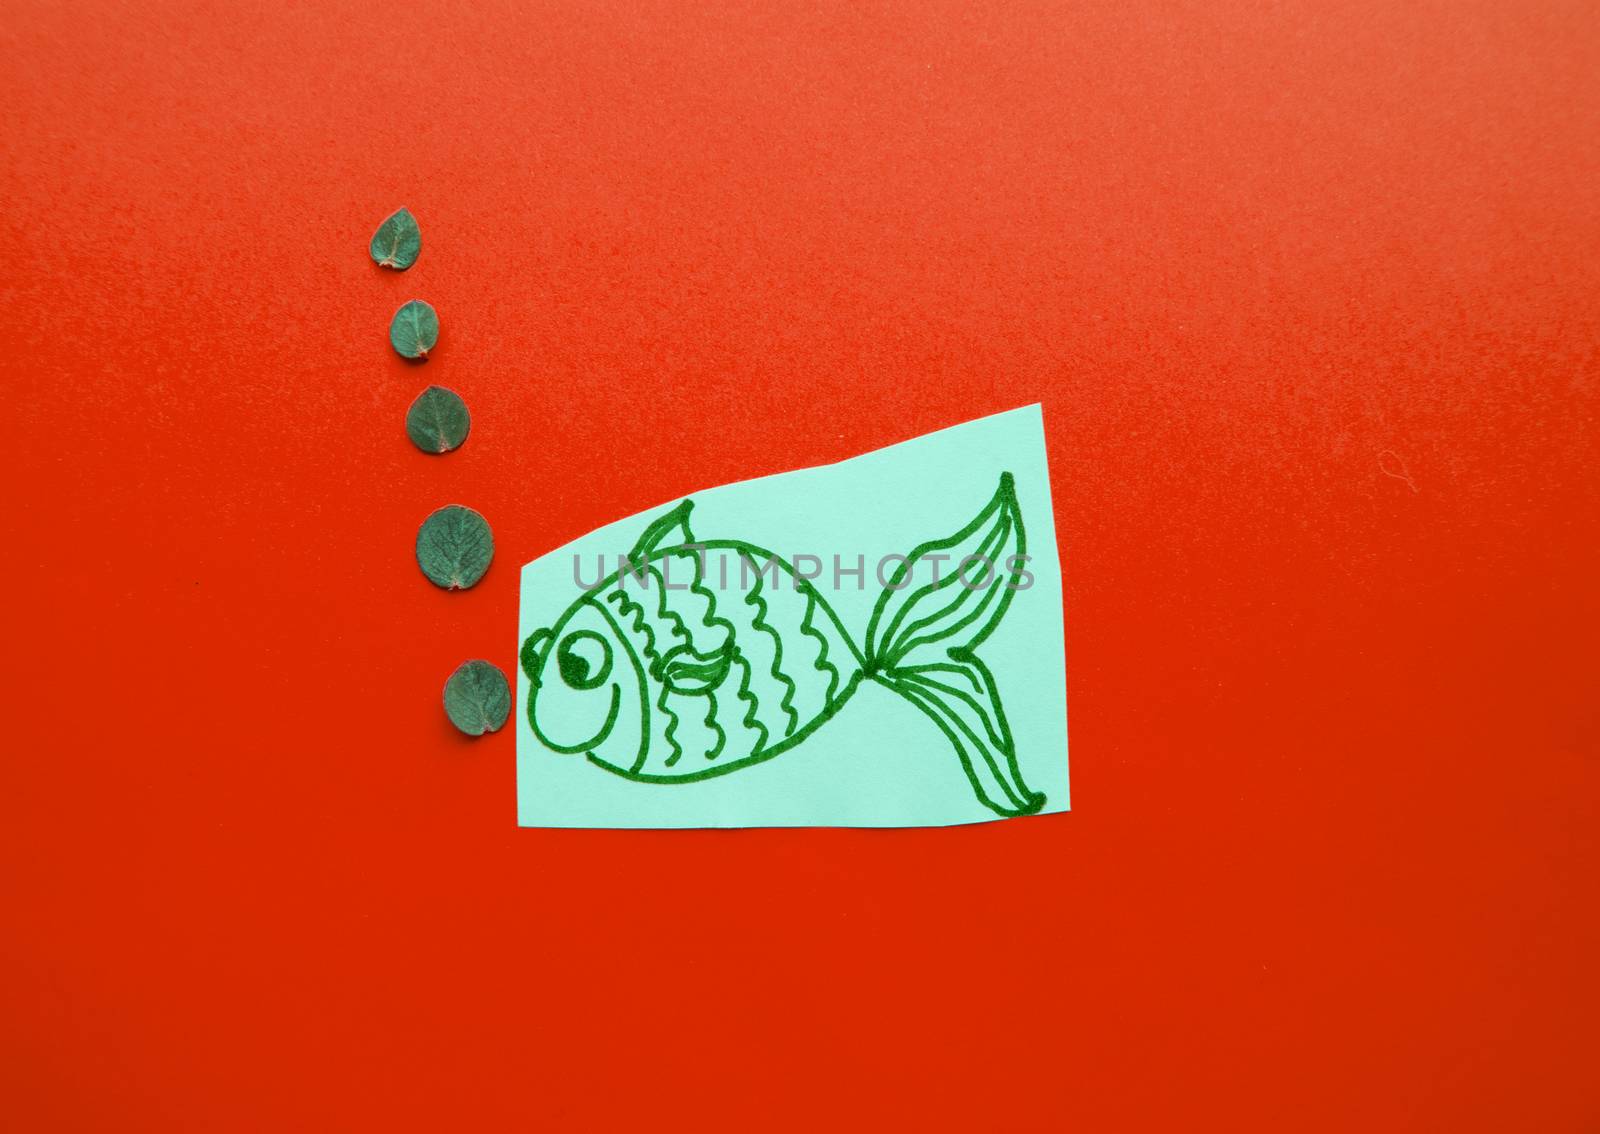 Funny fish with bubbles on red background, fool's Day.